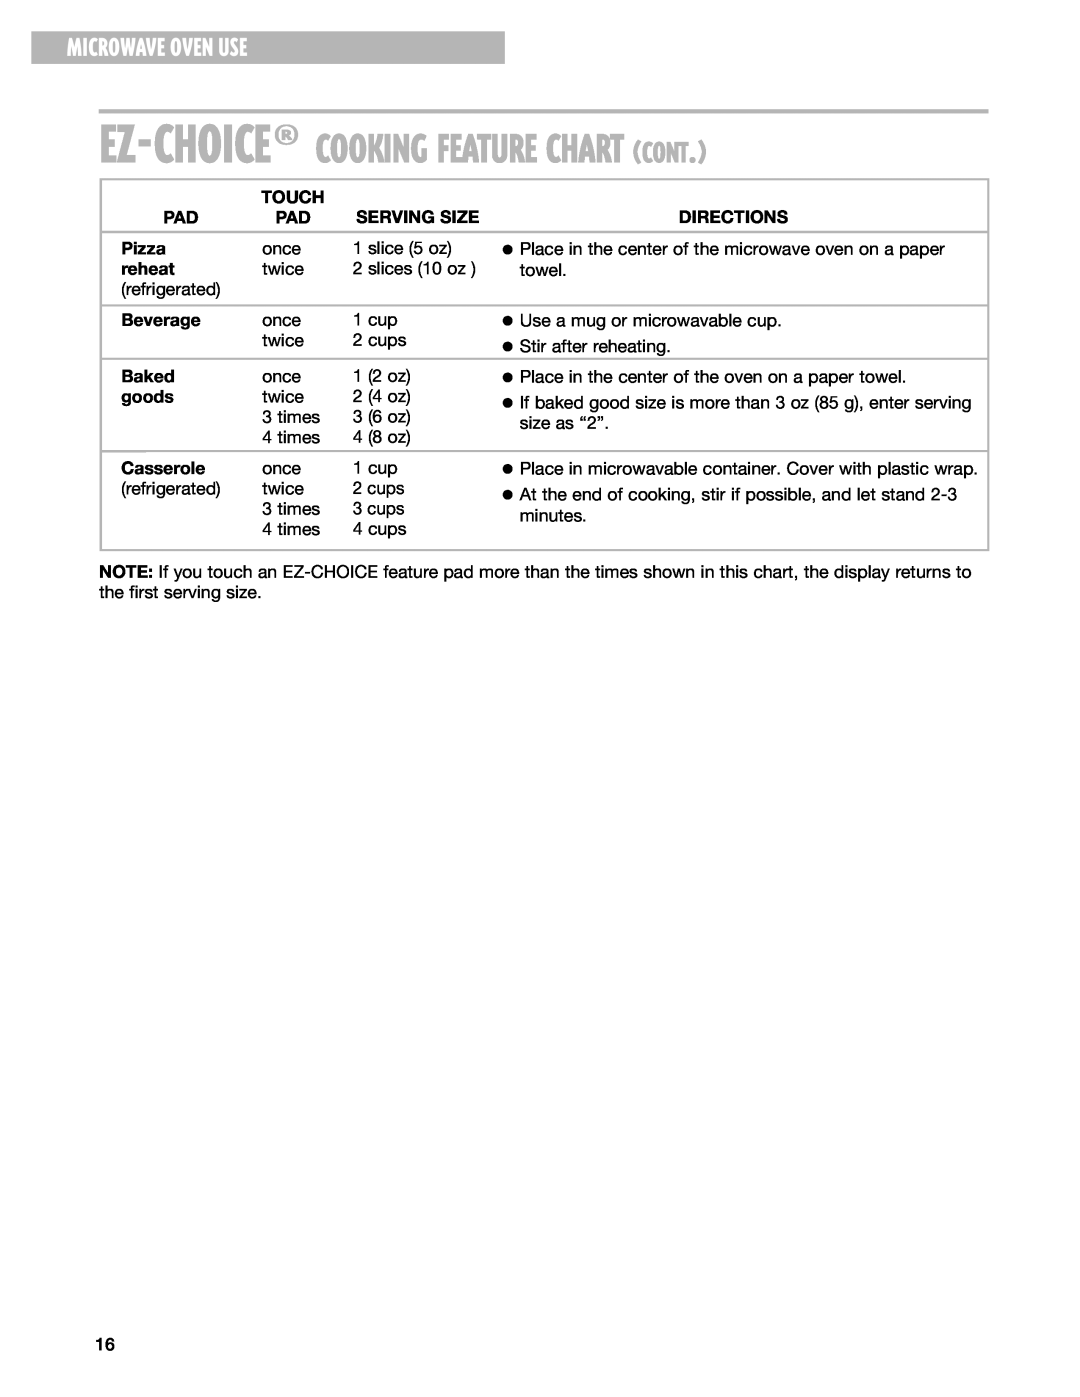 Whirlpool MT4070SK, MT4078SK installation instructions Ez-Choice¨Cookingfeature Chart Cont, Microwave Oven Use 